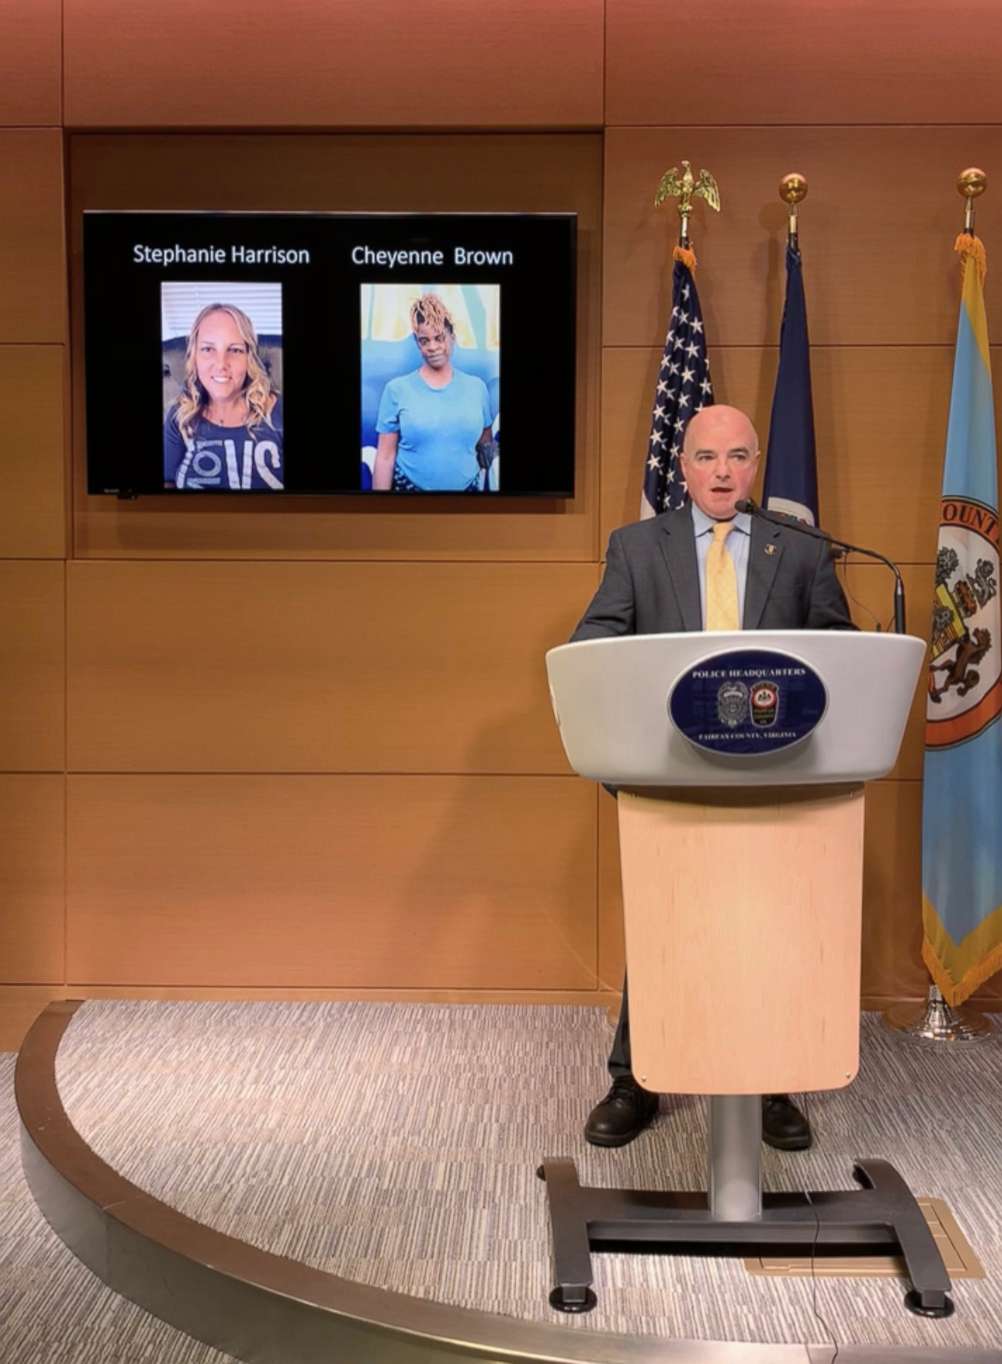 PHOTO: Fairfax County police officials said two alleged victims of the so-called shopping cart killer have been positively identified during a press conference in Fairfax, Va., Jan. 8, 2022.